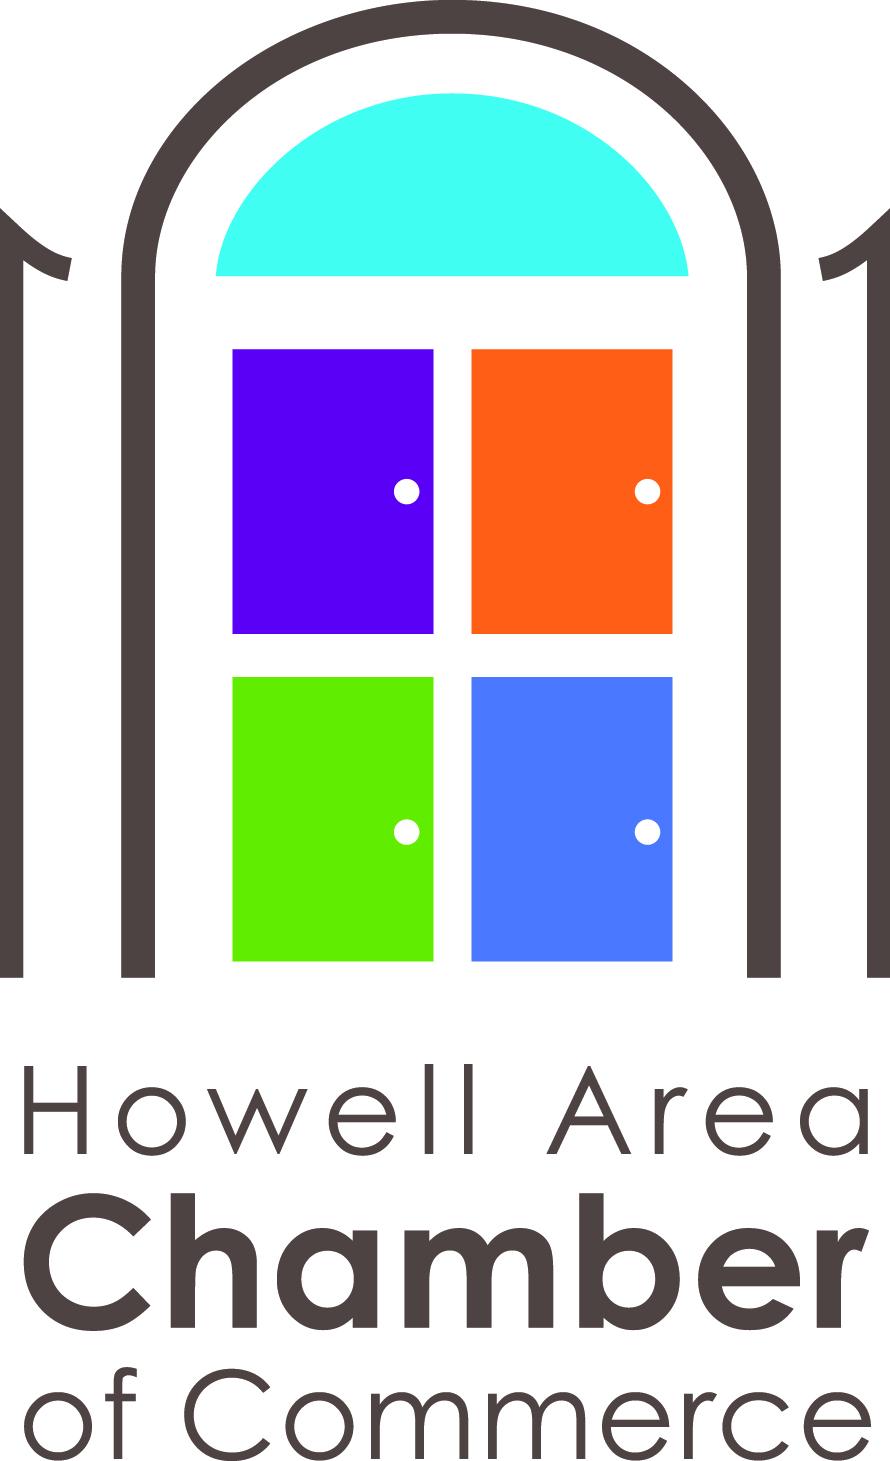 Howell Area Chamber of Commerce